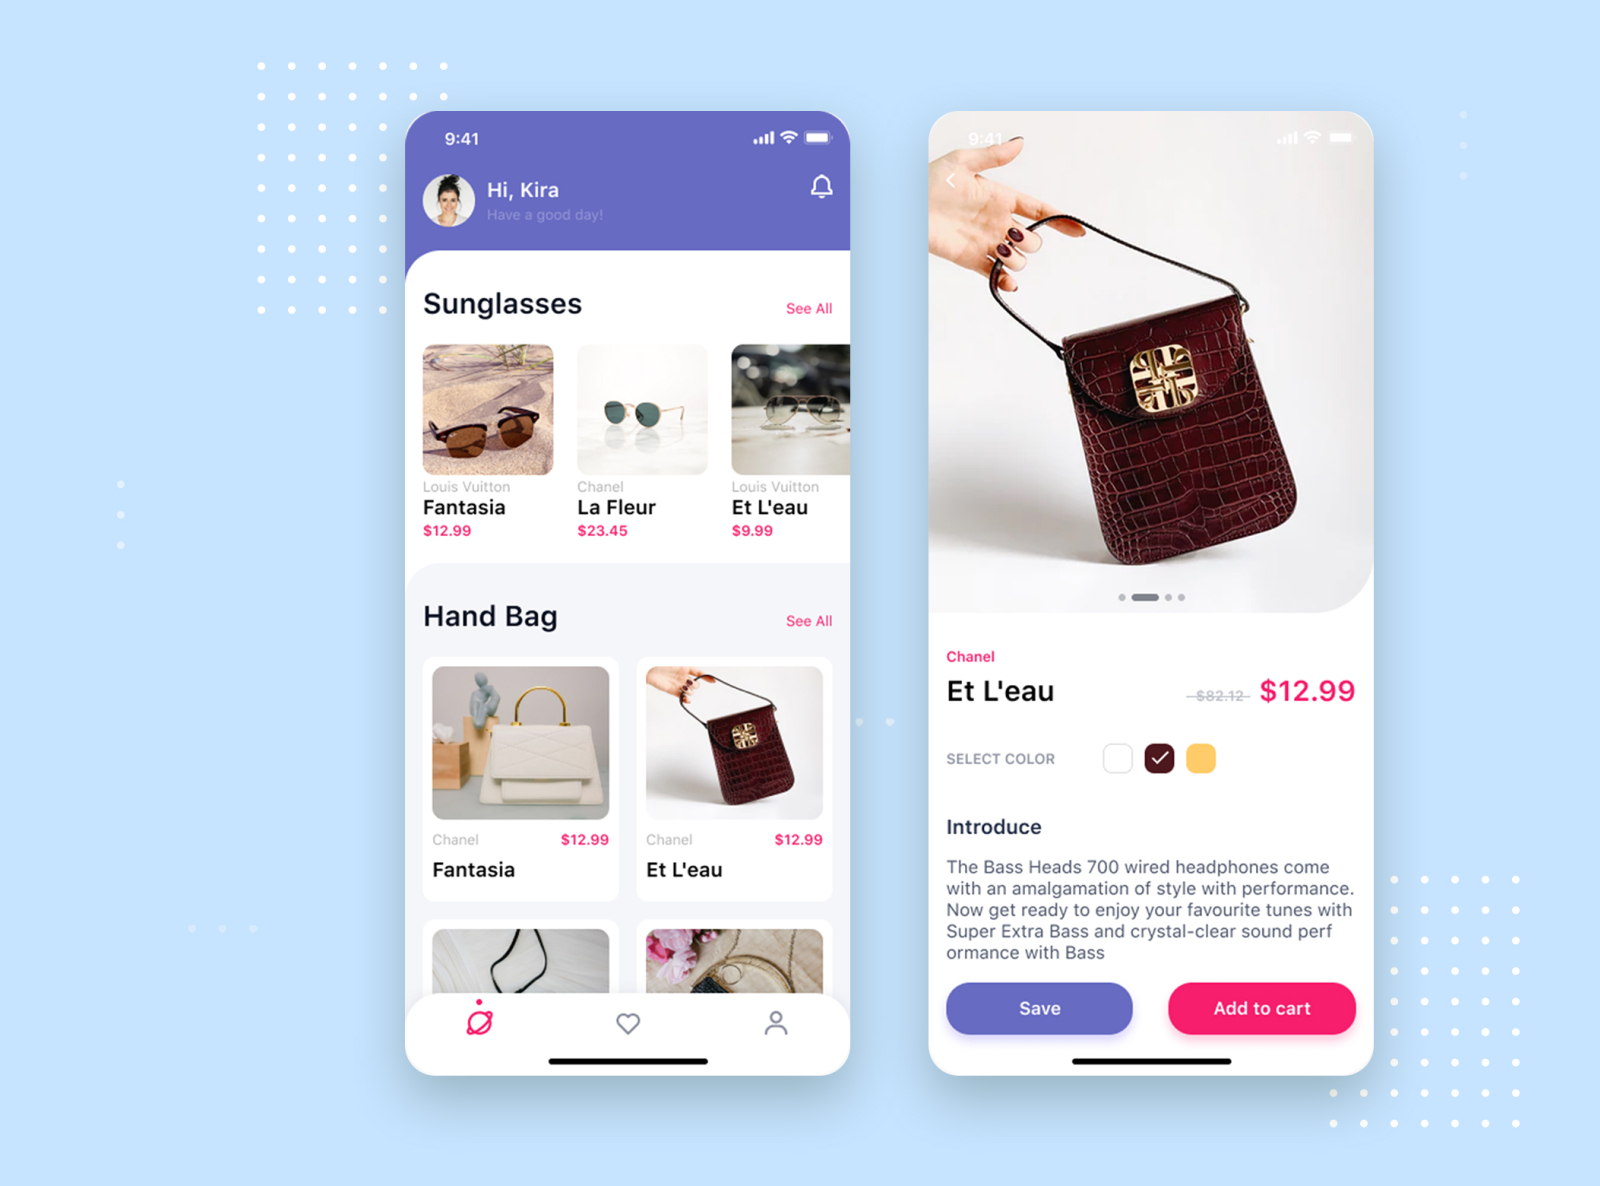 Profile Store App UI concept by Sy Thong Nguyen on Dribbble